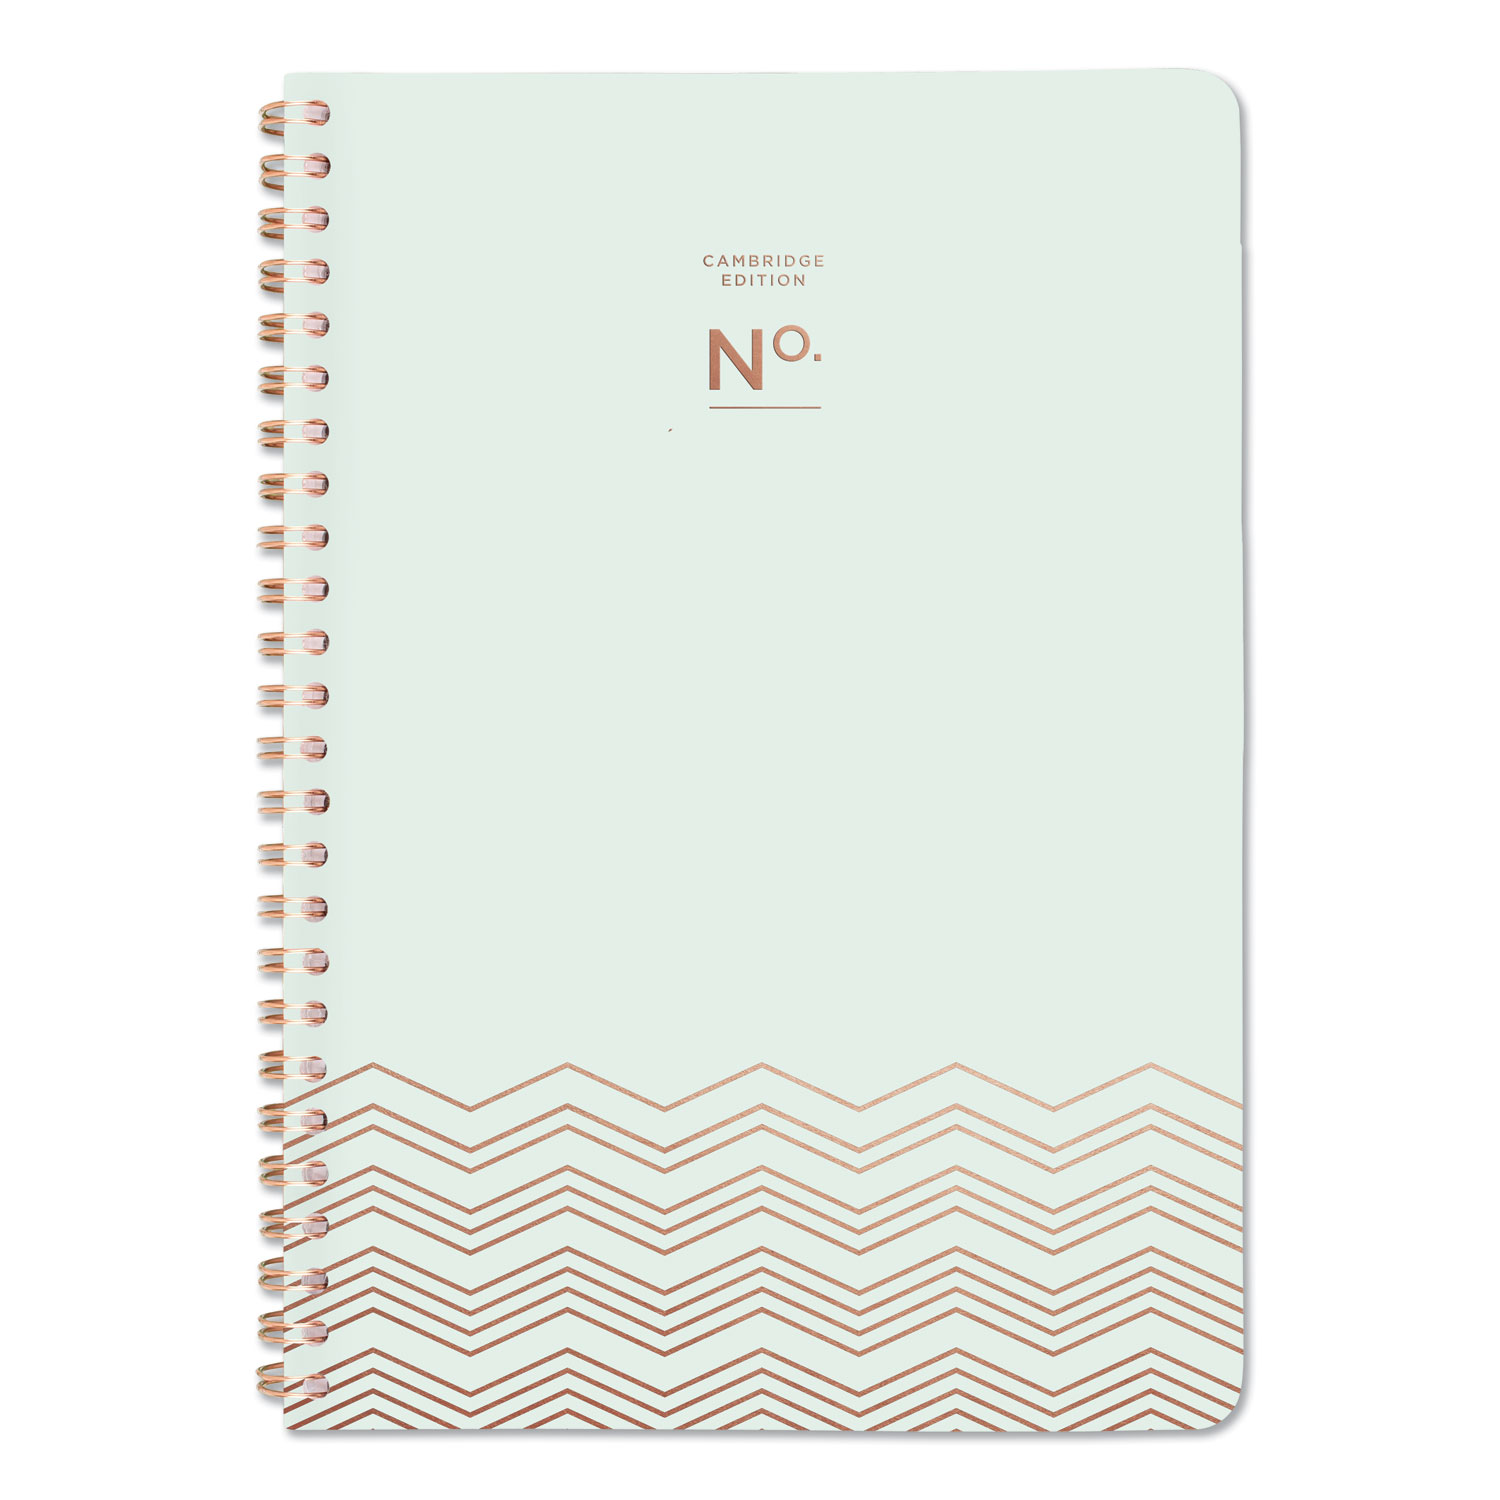  Cambridge 528020046 Workstyle Soft Cover Weekly/Monthly Planner 8 1/2 x 5 1/2, Seafoam Cover, 2020 (AAG528020046) 